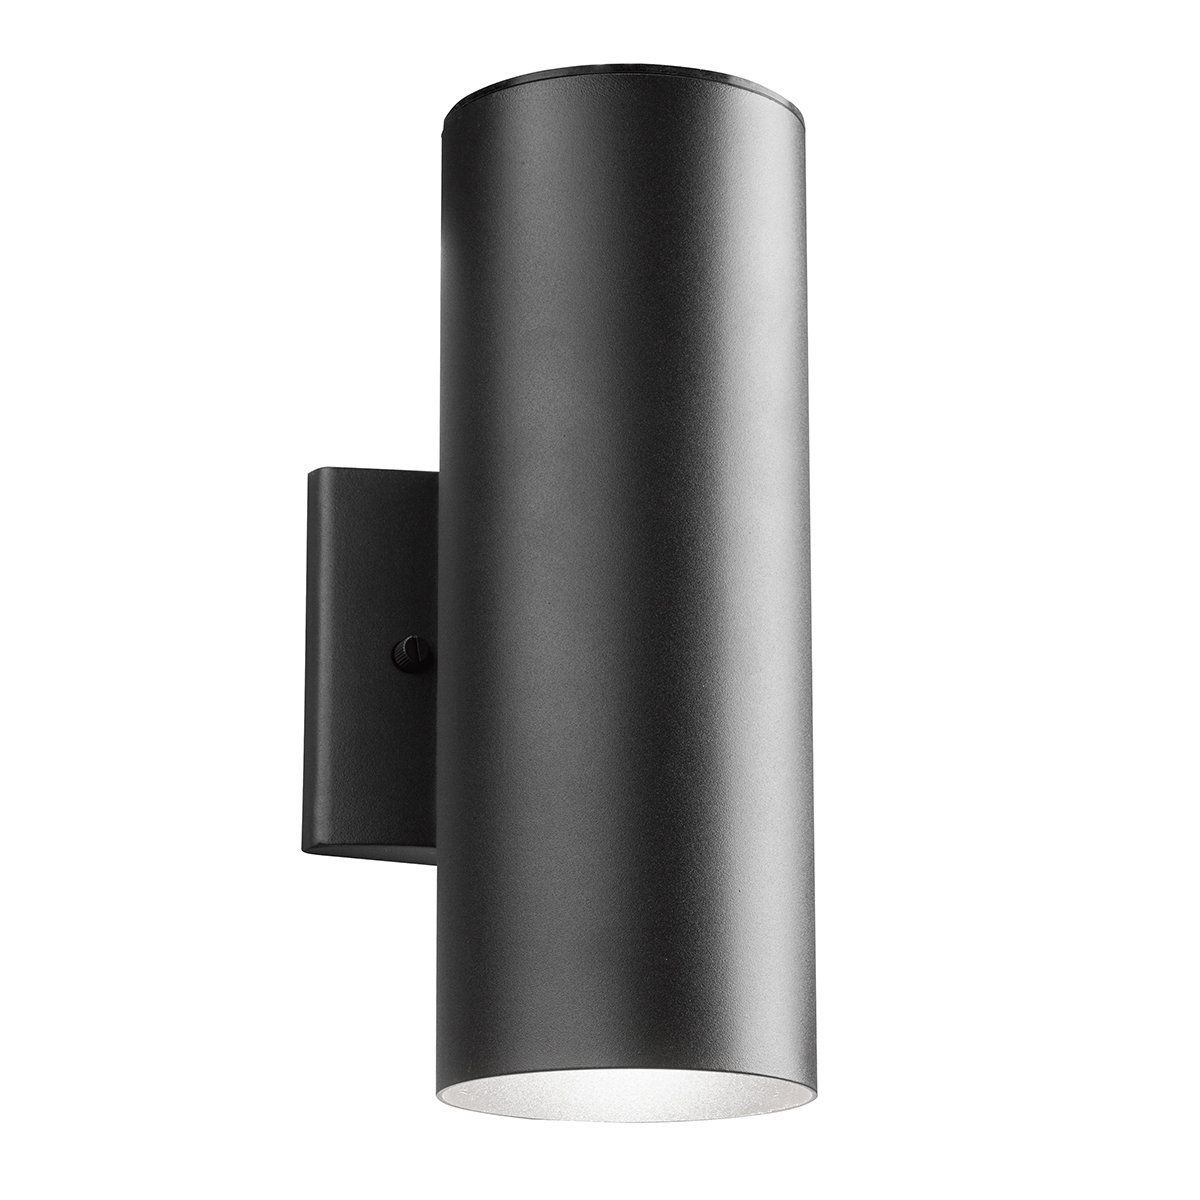 Furniture : Allen Roth Bronze Outdoor Wall Mounted Light Lighting With Regard To Outdoor Wall Lighting Fixtures At Amazon (View 4 of 15)